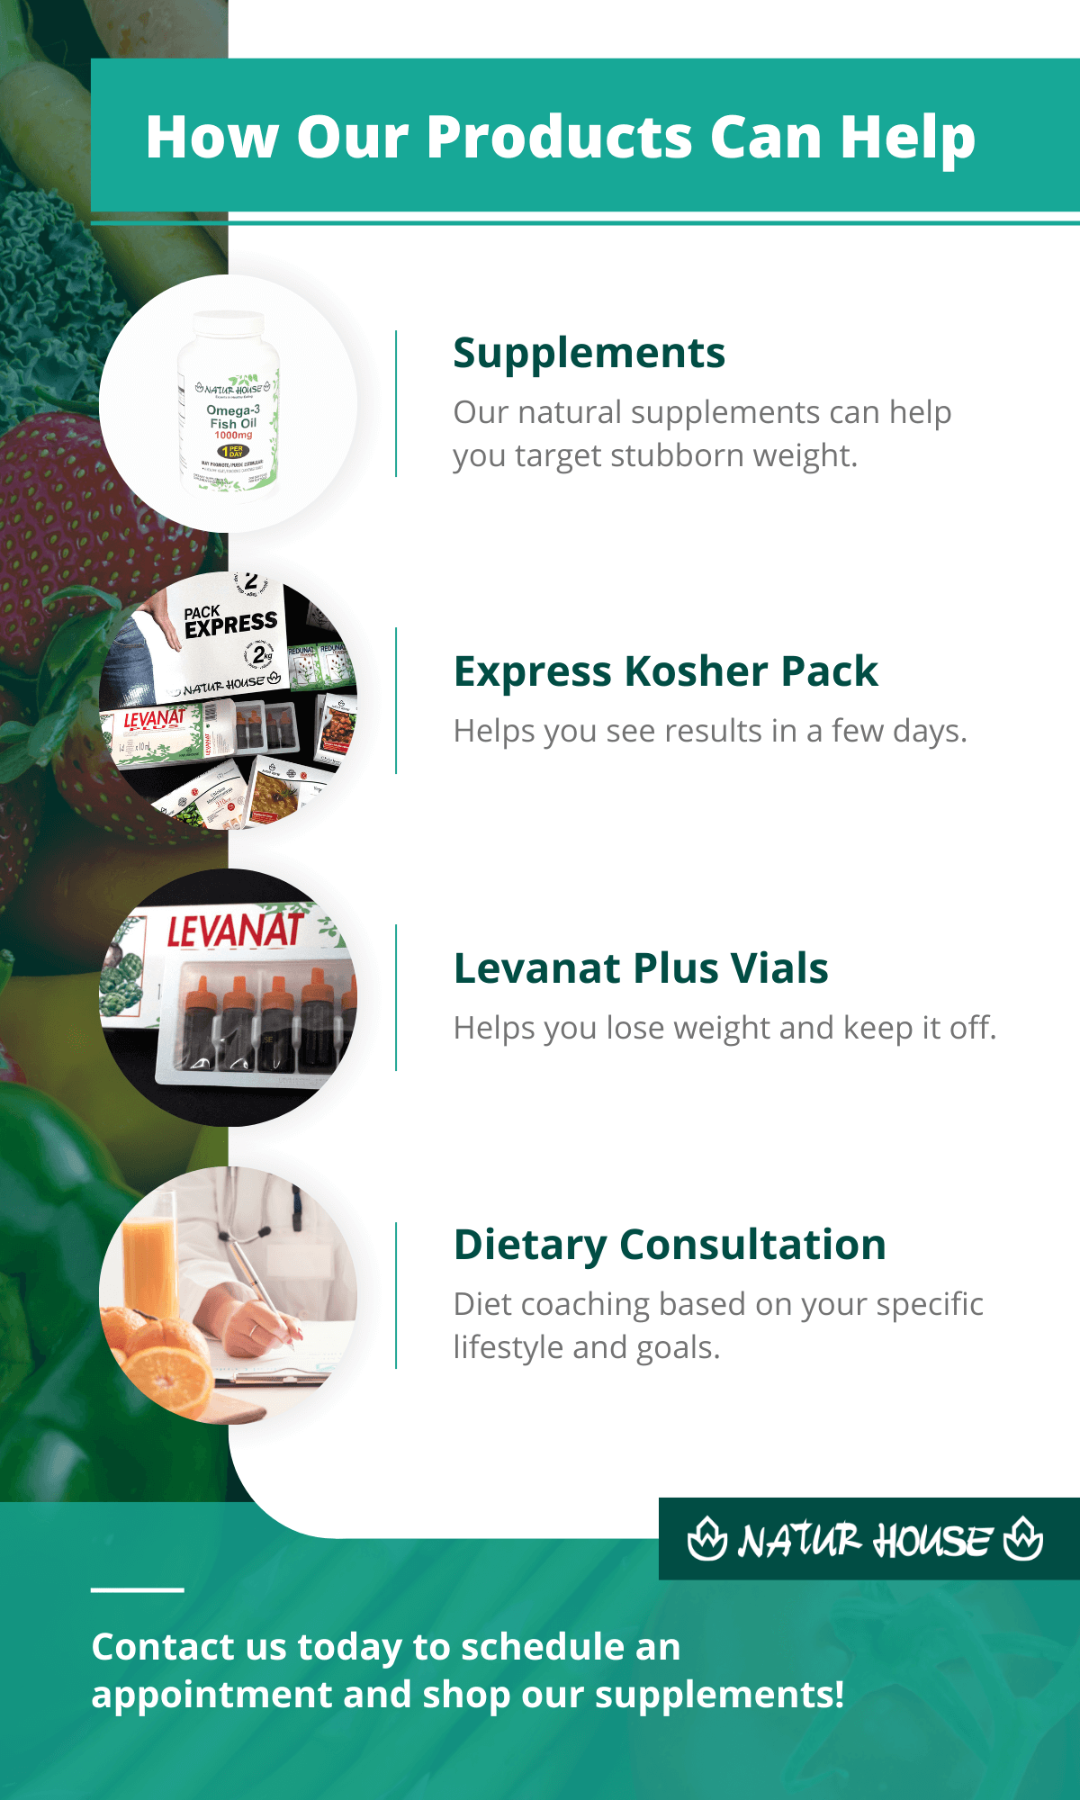 How Our Products Can Help Infographic